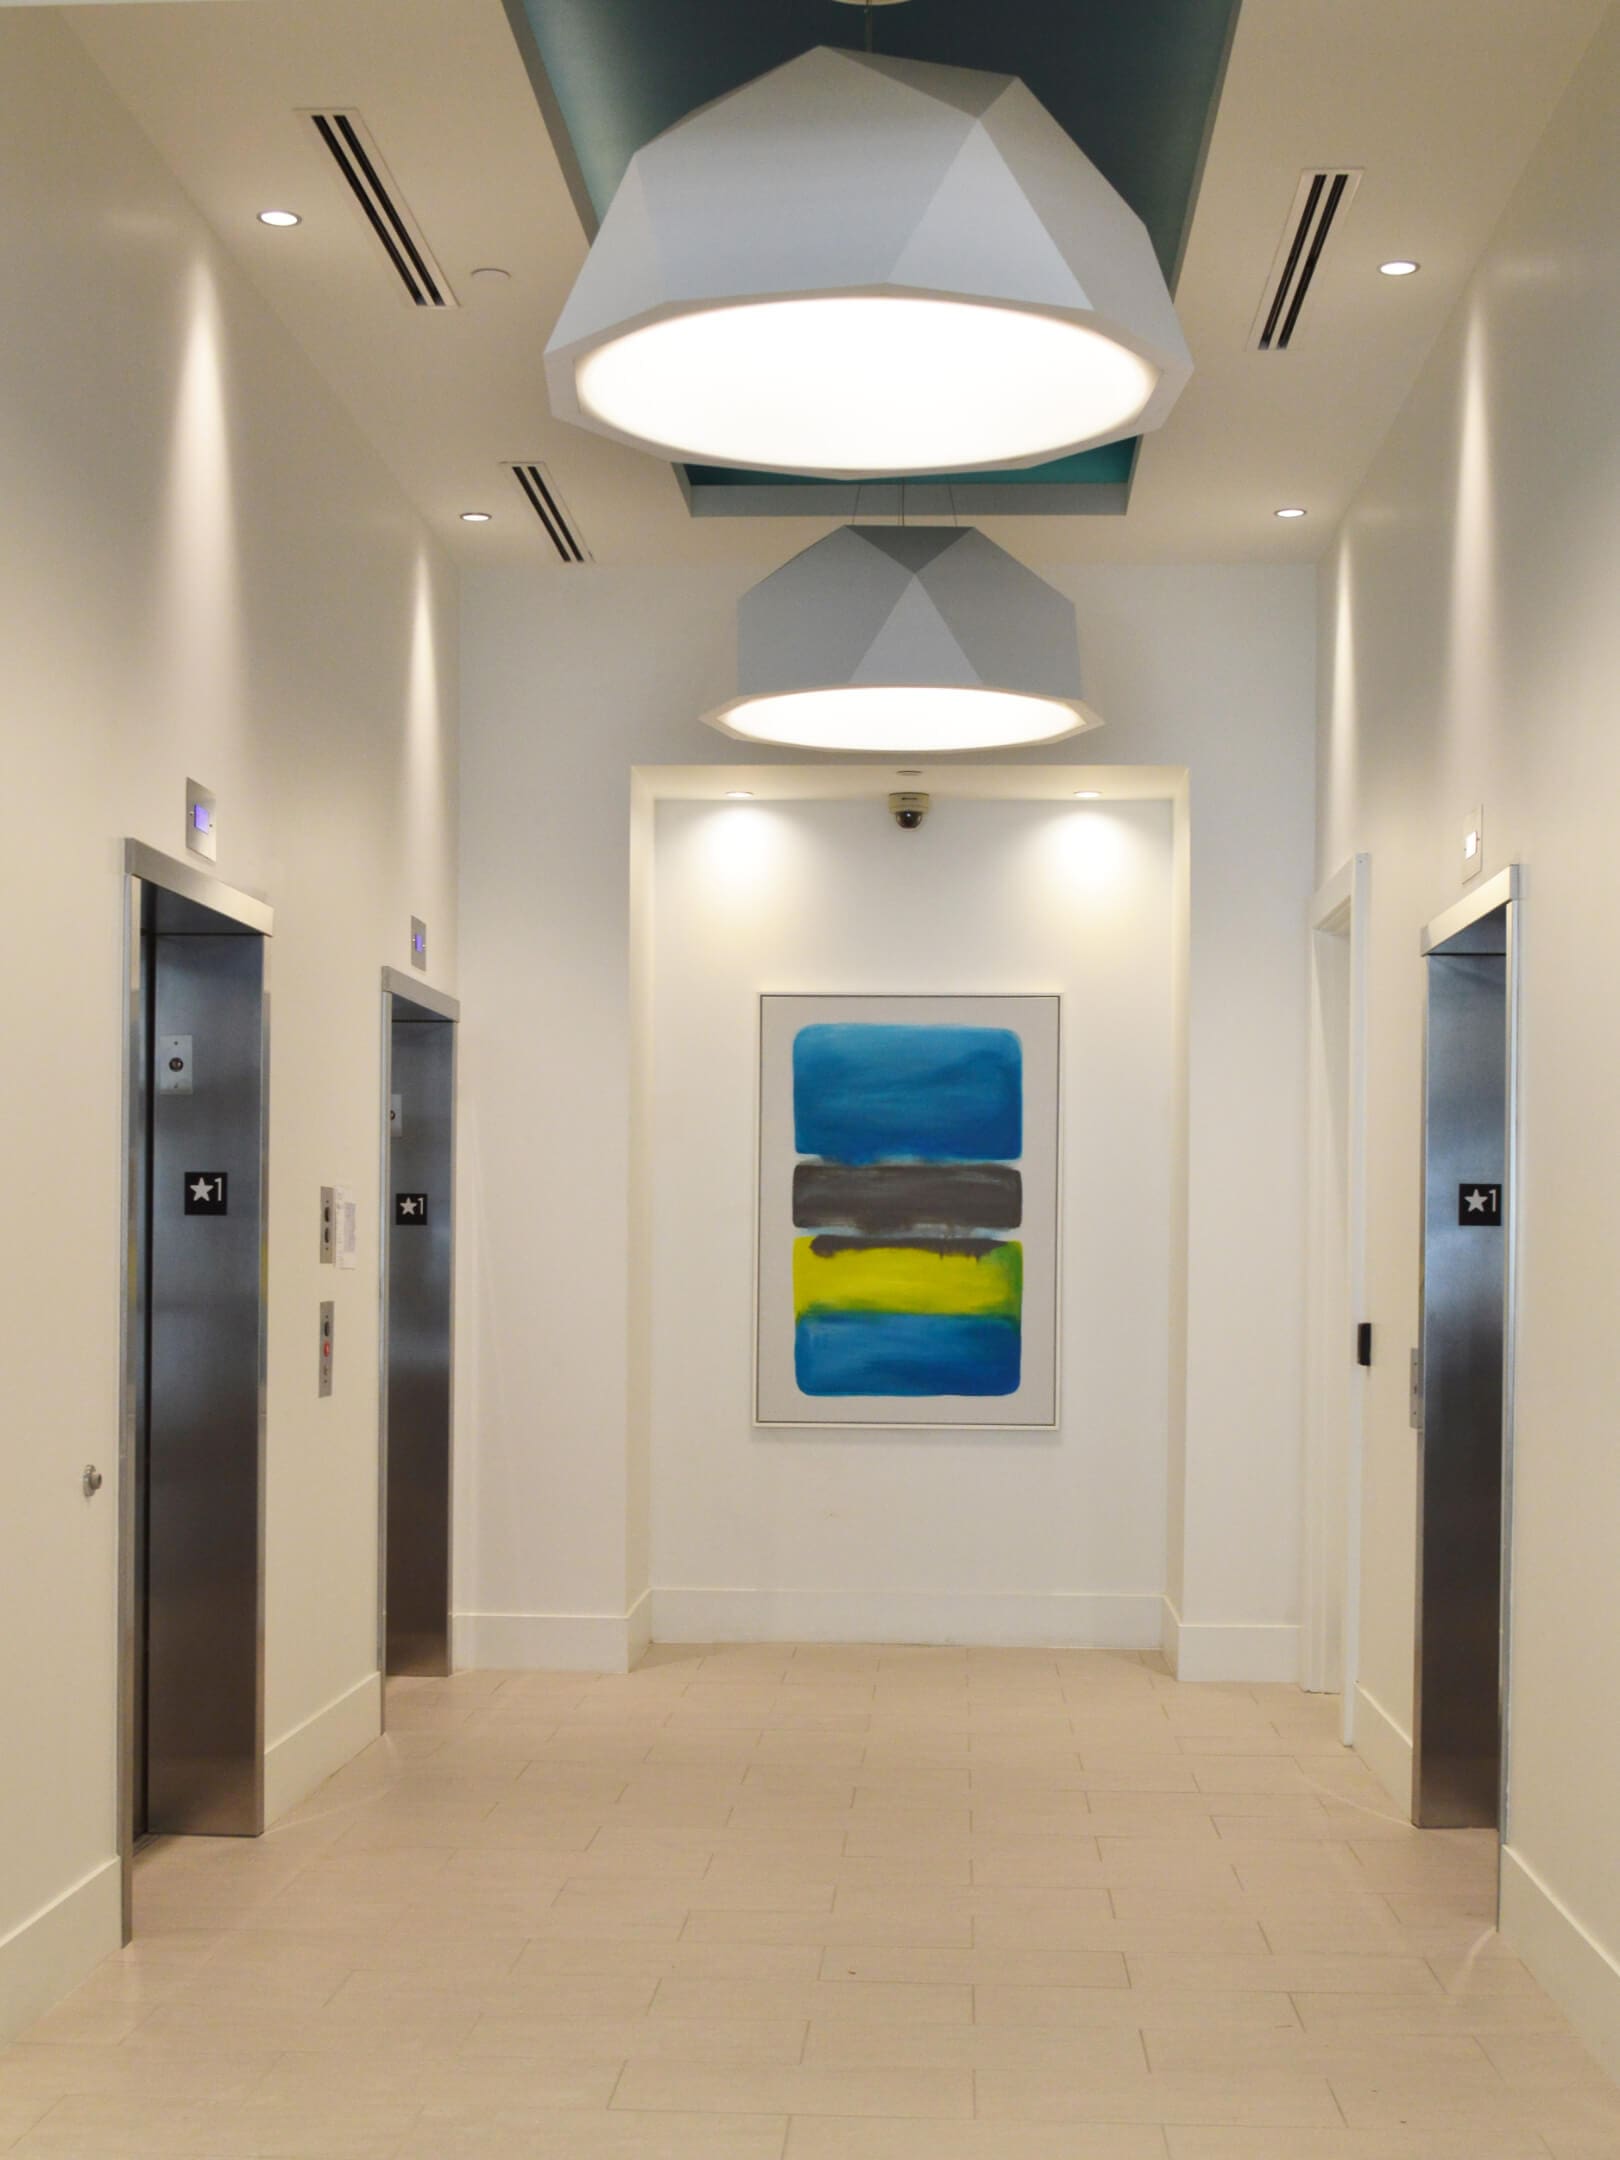 White ceiling lights with three elevators